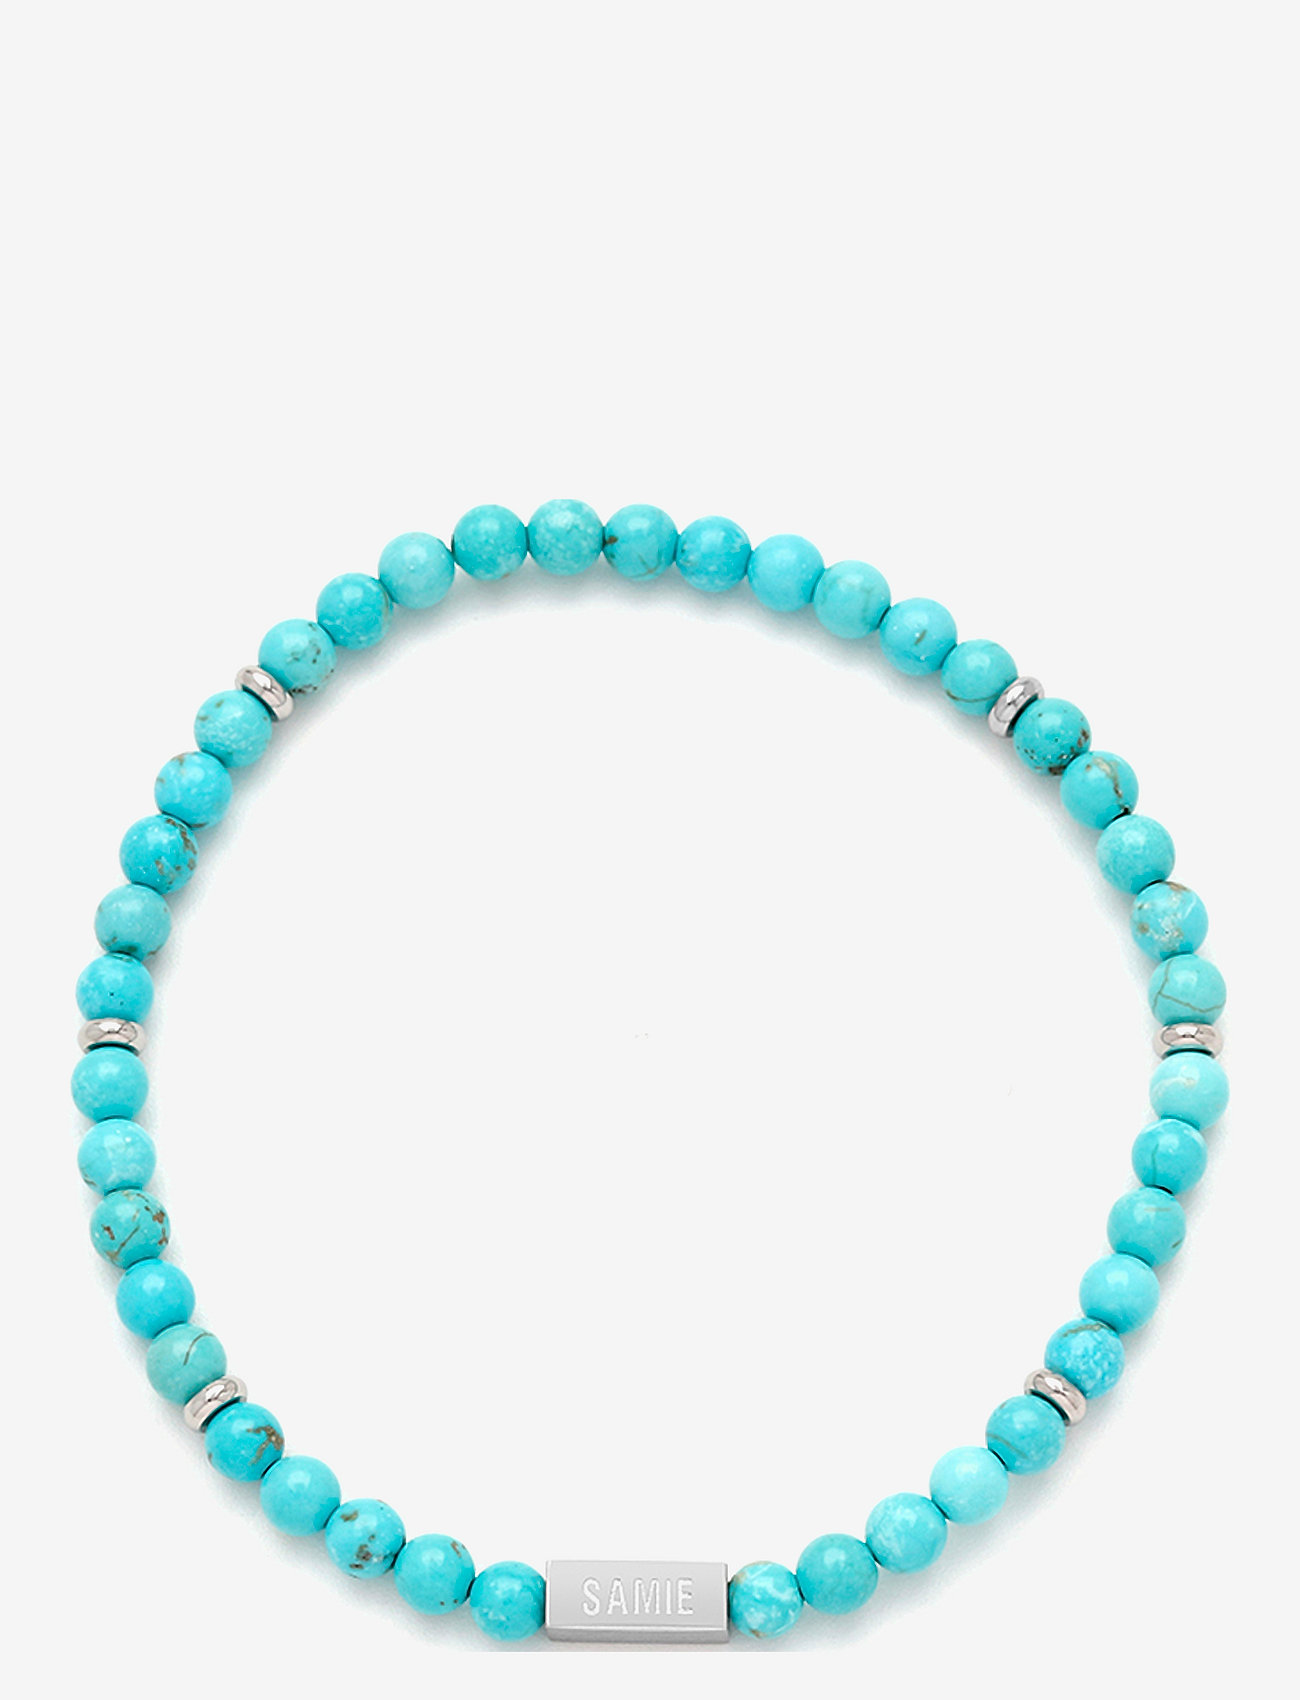 Samie - Matheo - Bracelet with turquoise beads - lowest prices - swsturquoise - 0